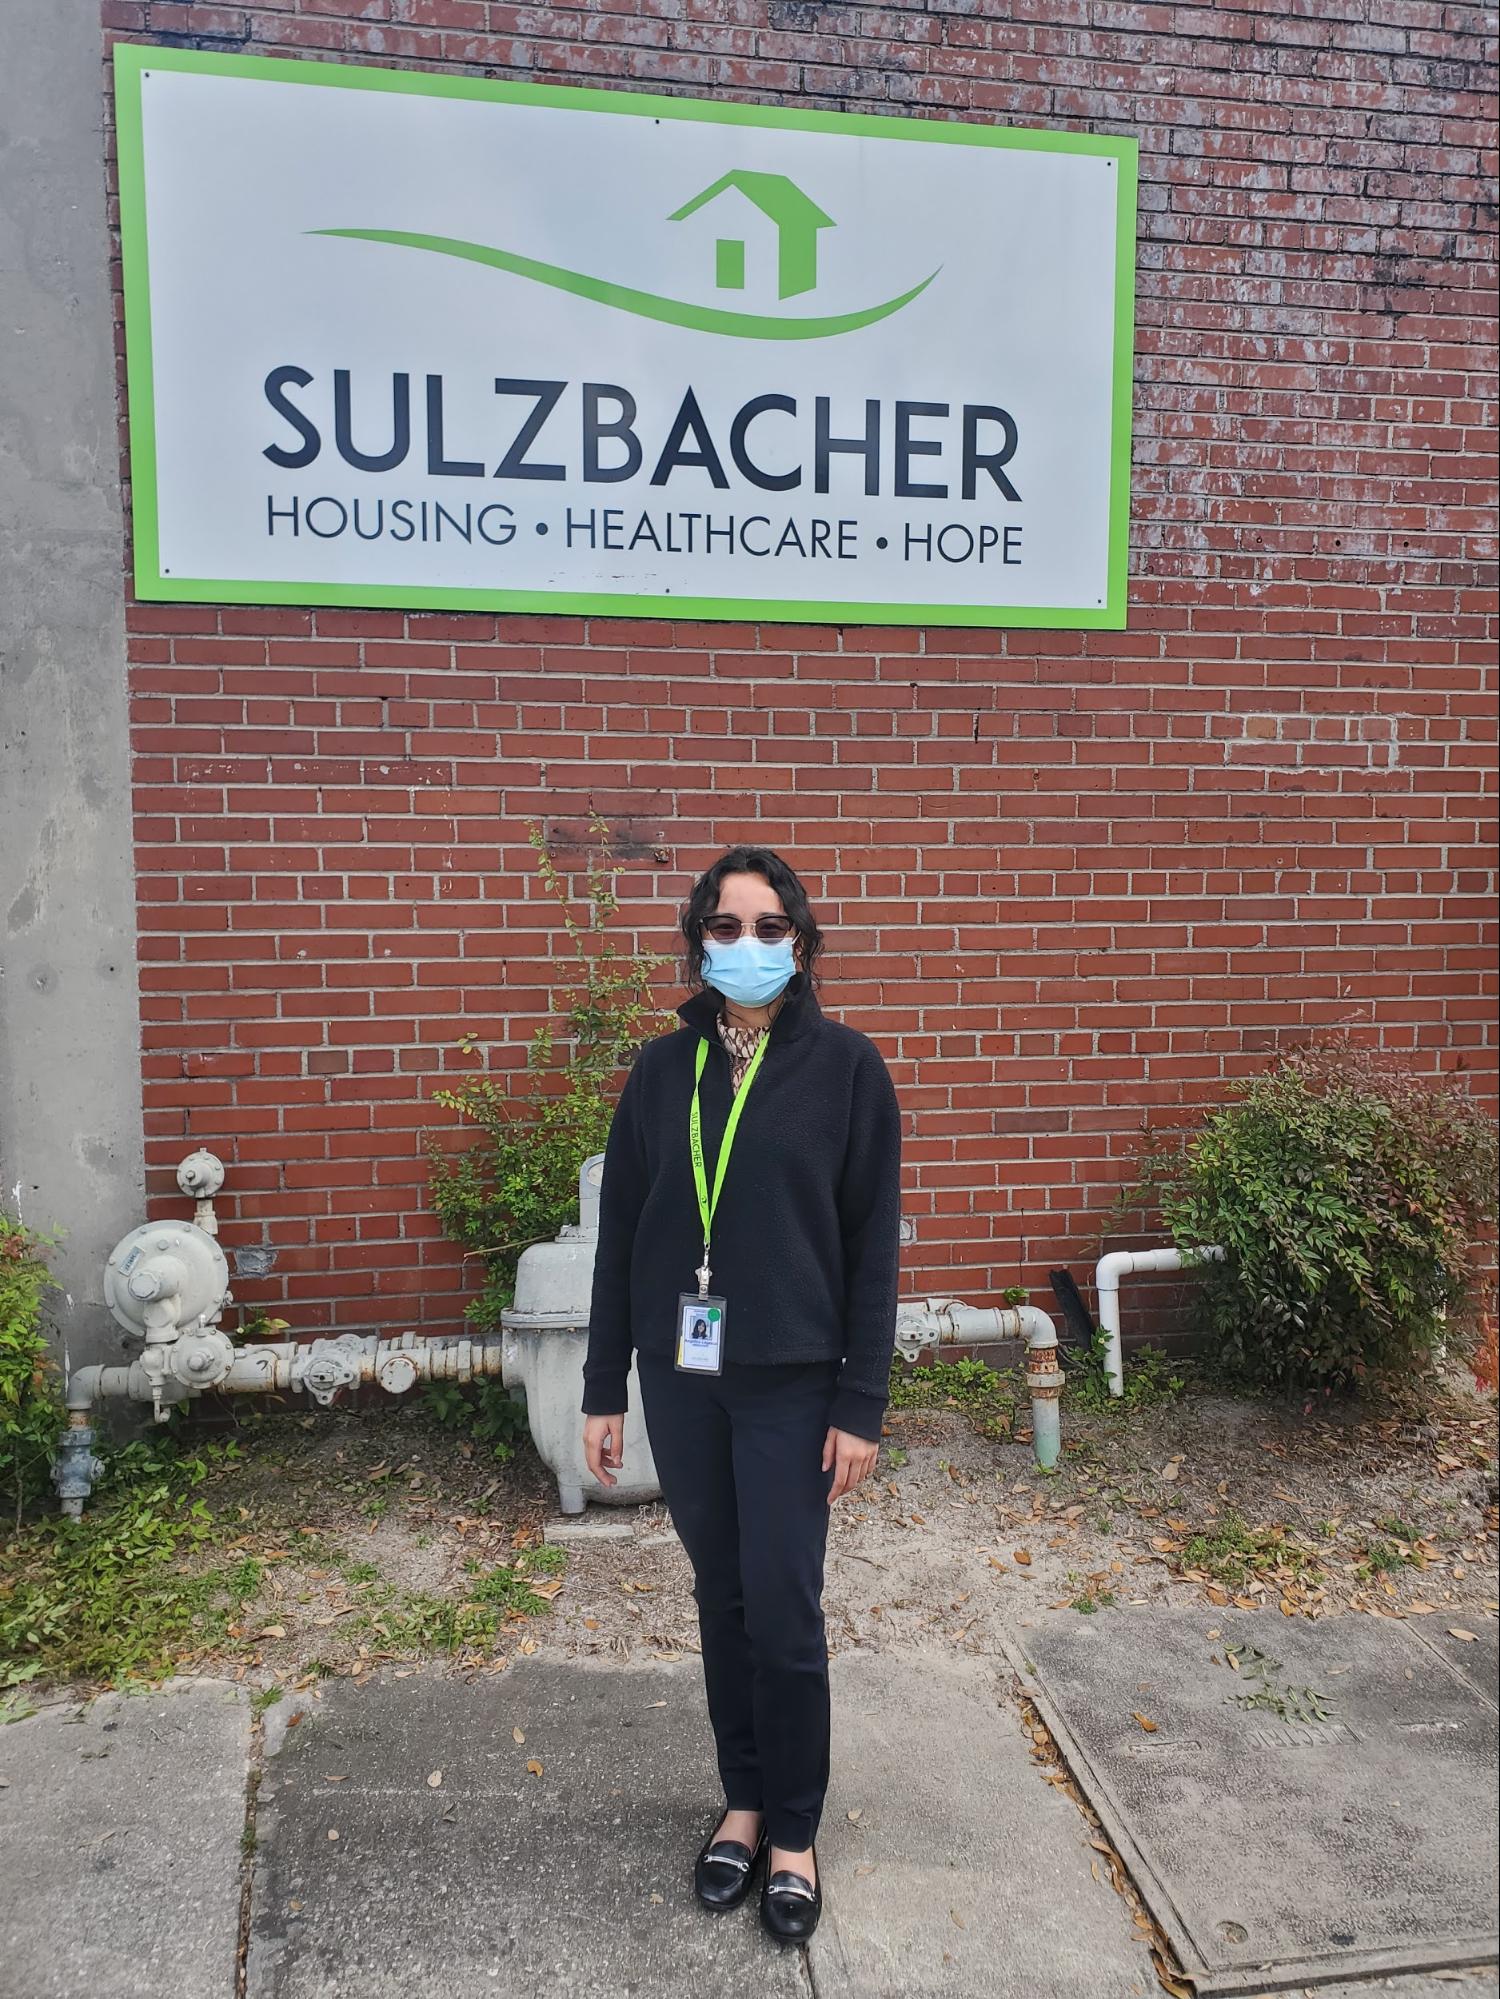 At my host site, the Sulzbacher Center I assist patients with securing one of the three “H”s, healthcare!